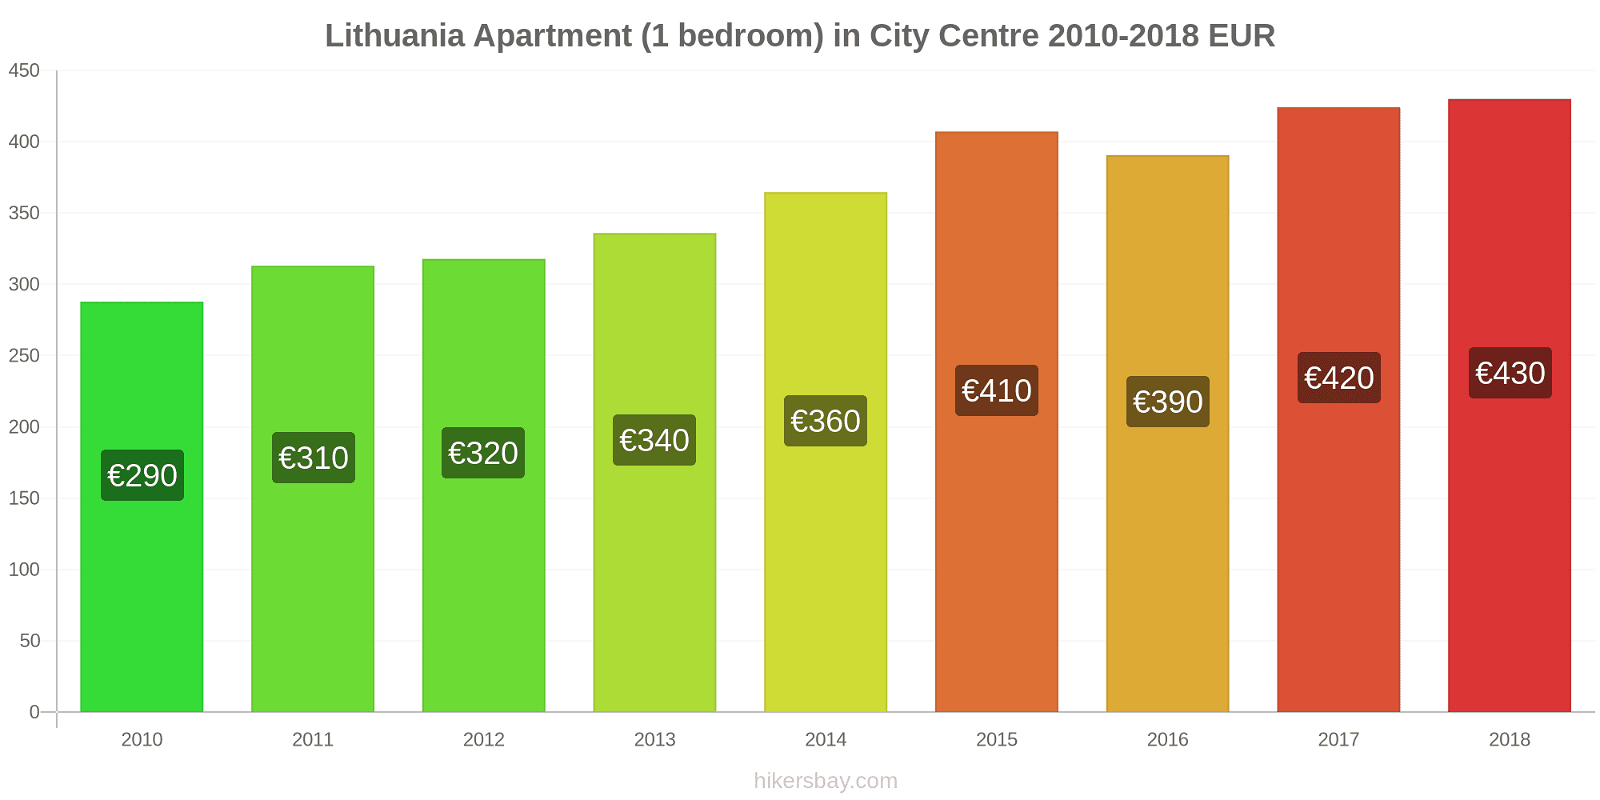 Lithuania price changes Apartment (1 bedroom) in city centre hikersbay.com